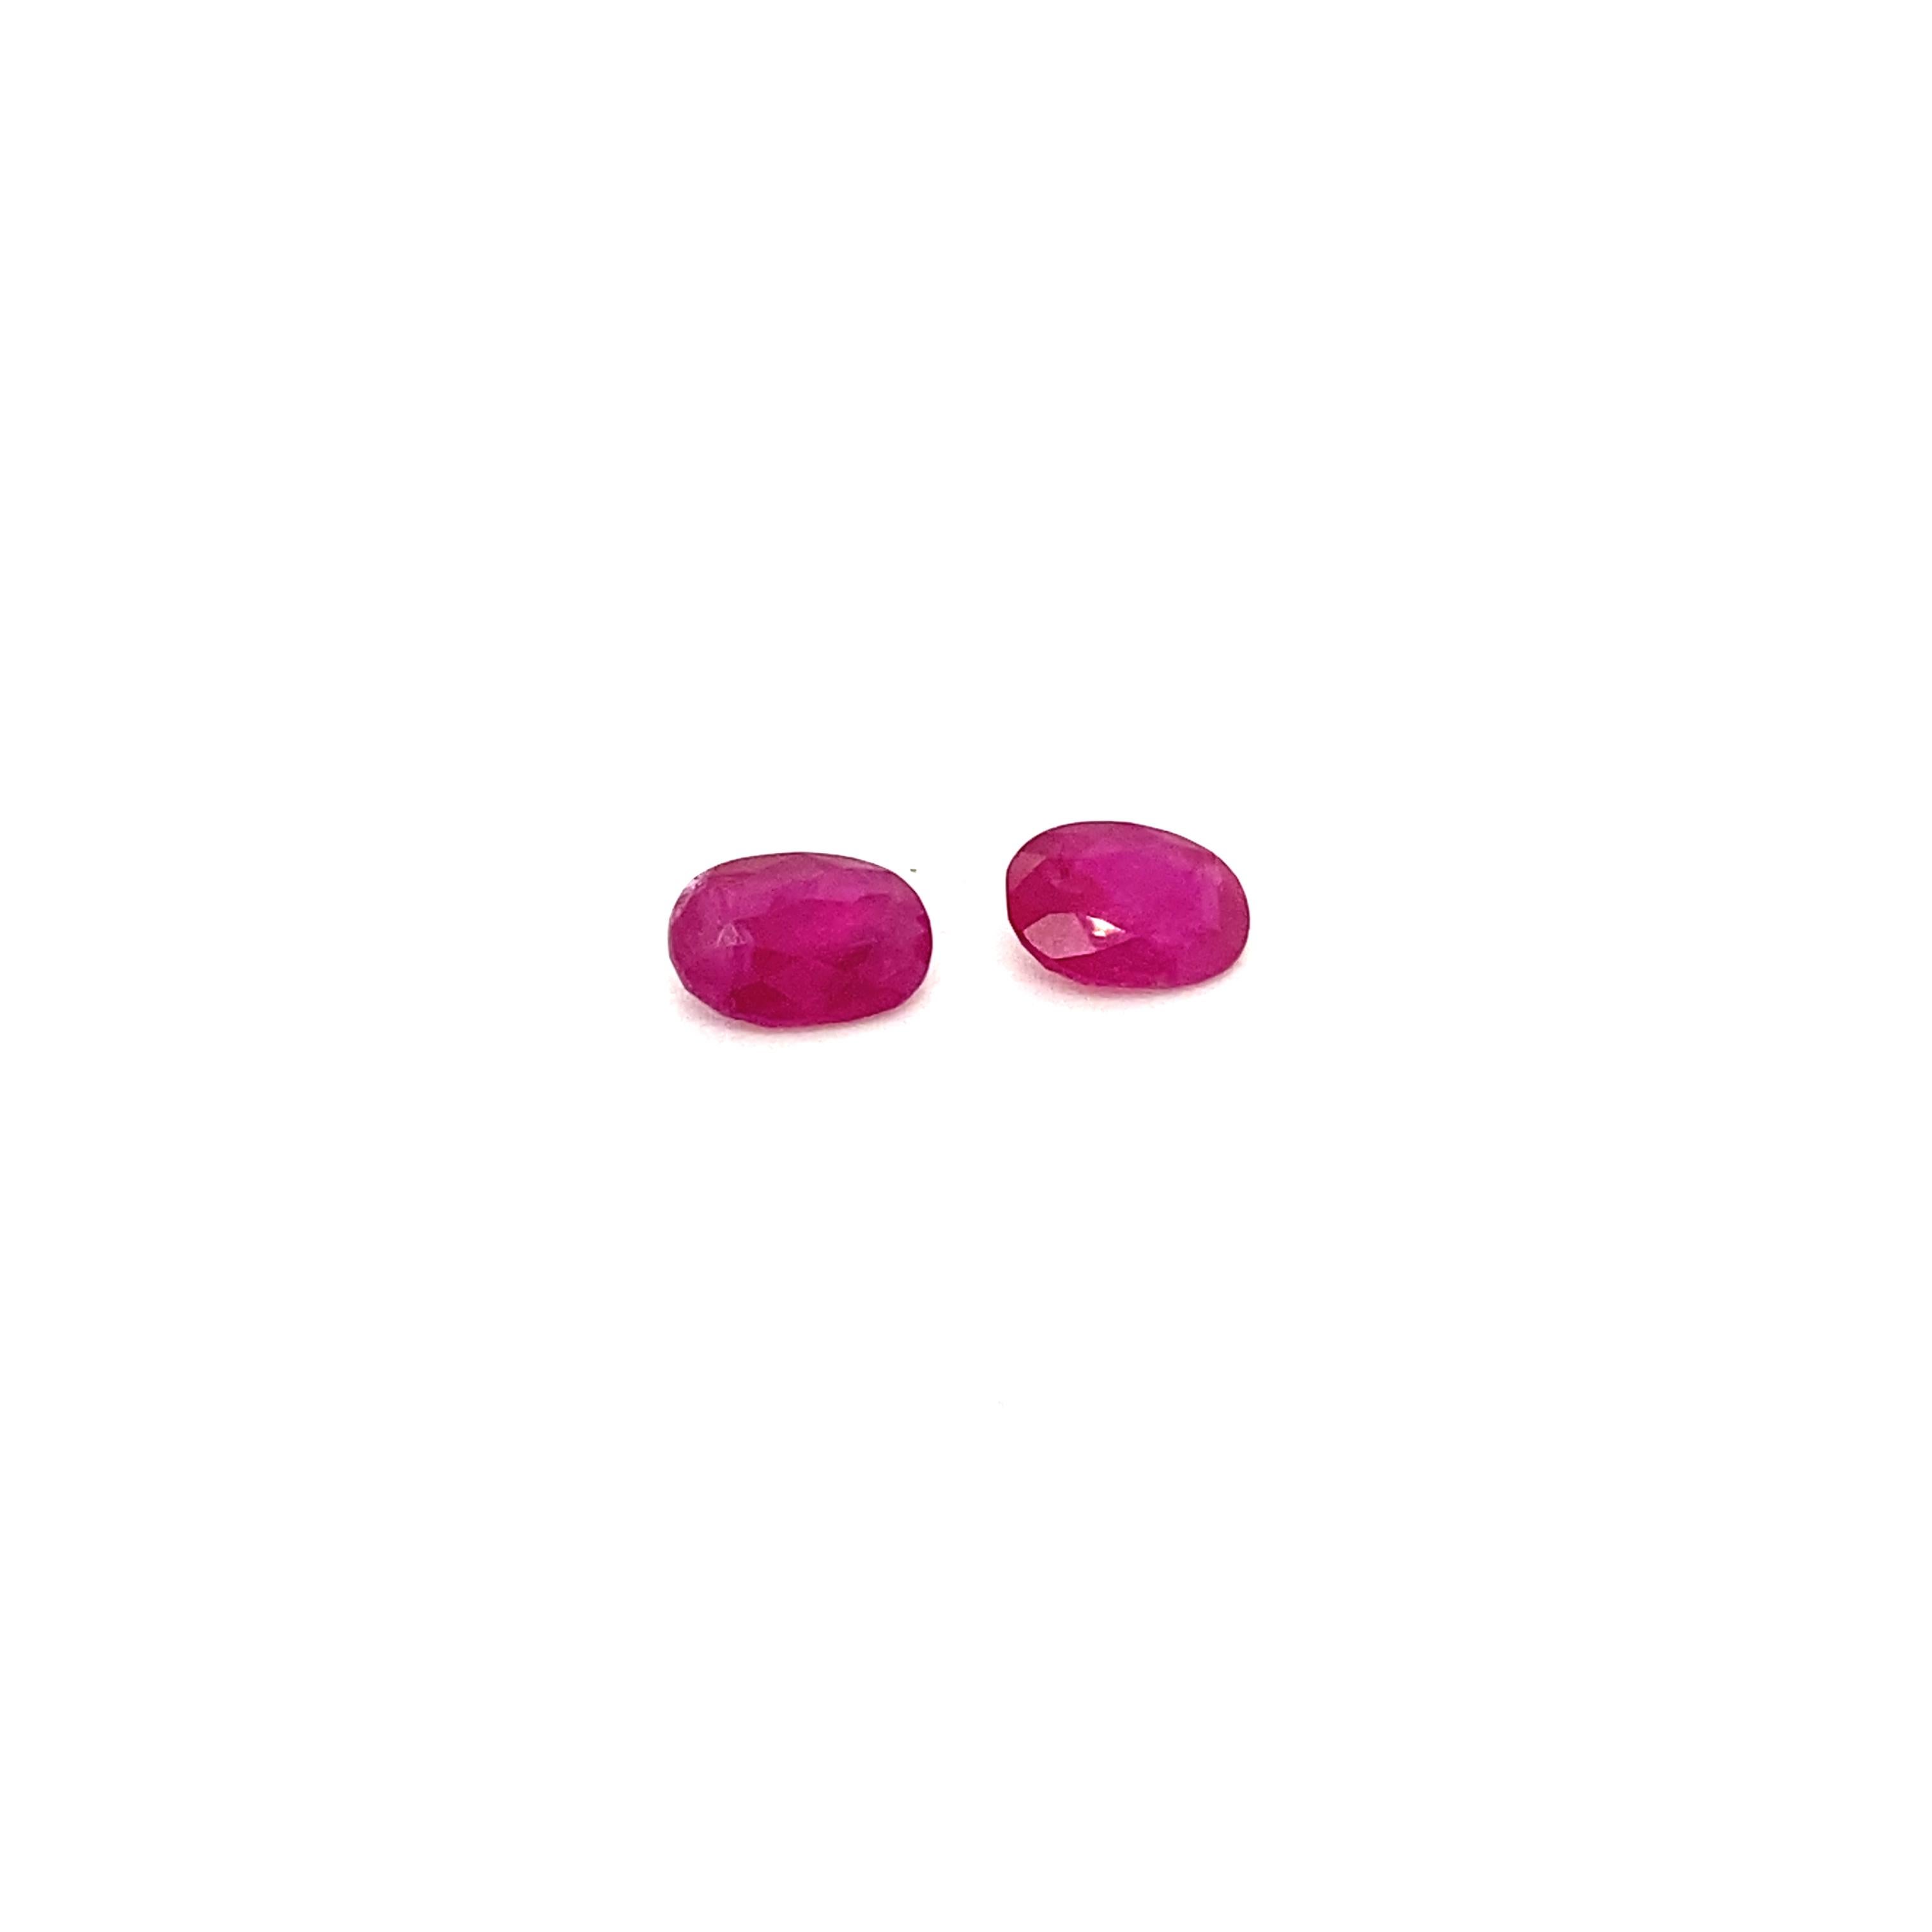 2.81 Carat Unheated Oval-cut Burmese Rubies, Pair:

A beautiful pair, they are oval-cut unheated Burmese rubies weighing a total of 2.81 carat. The rubies have good cutting proportions, and possess good colour saturation and brilliance. The origin